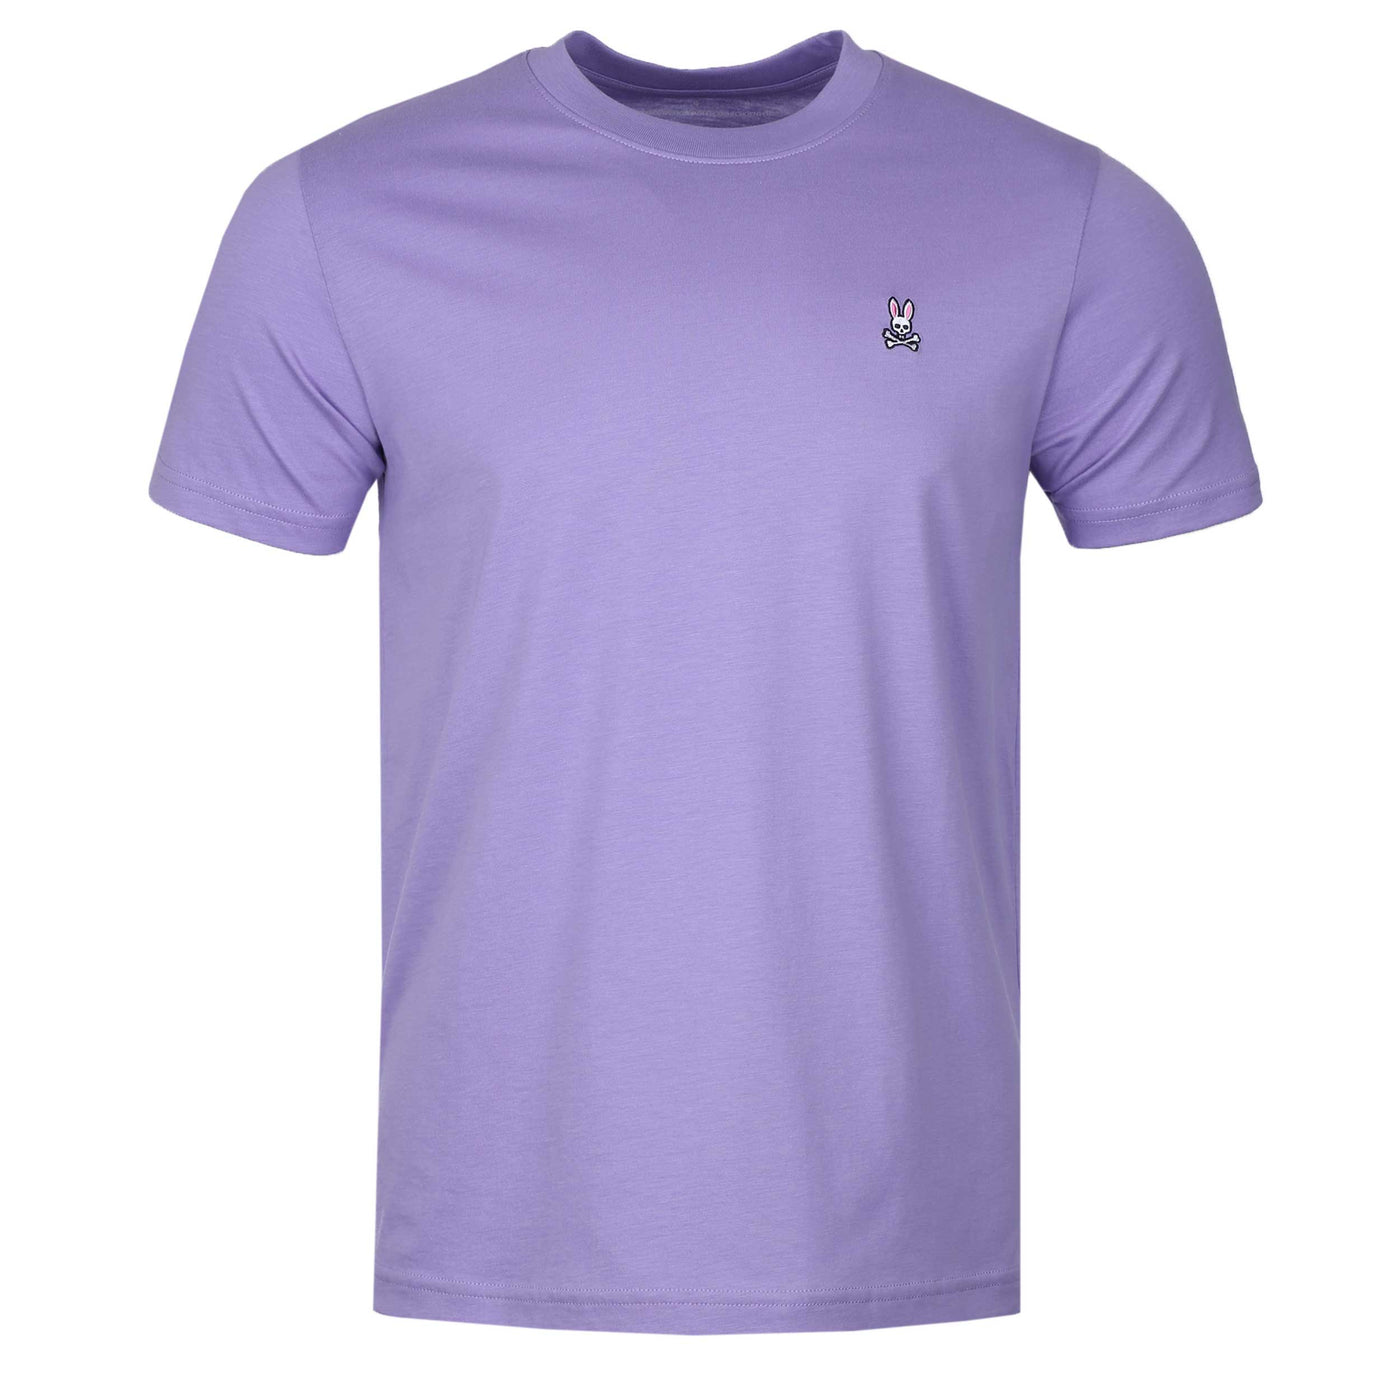 Psycho Bunny Classic T-Shirt in Lavender